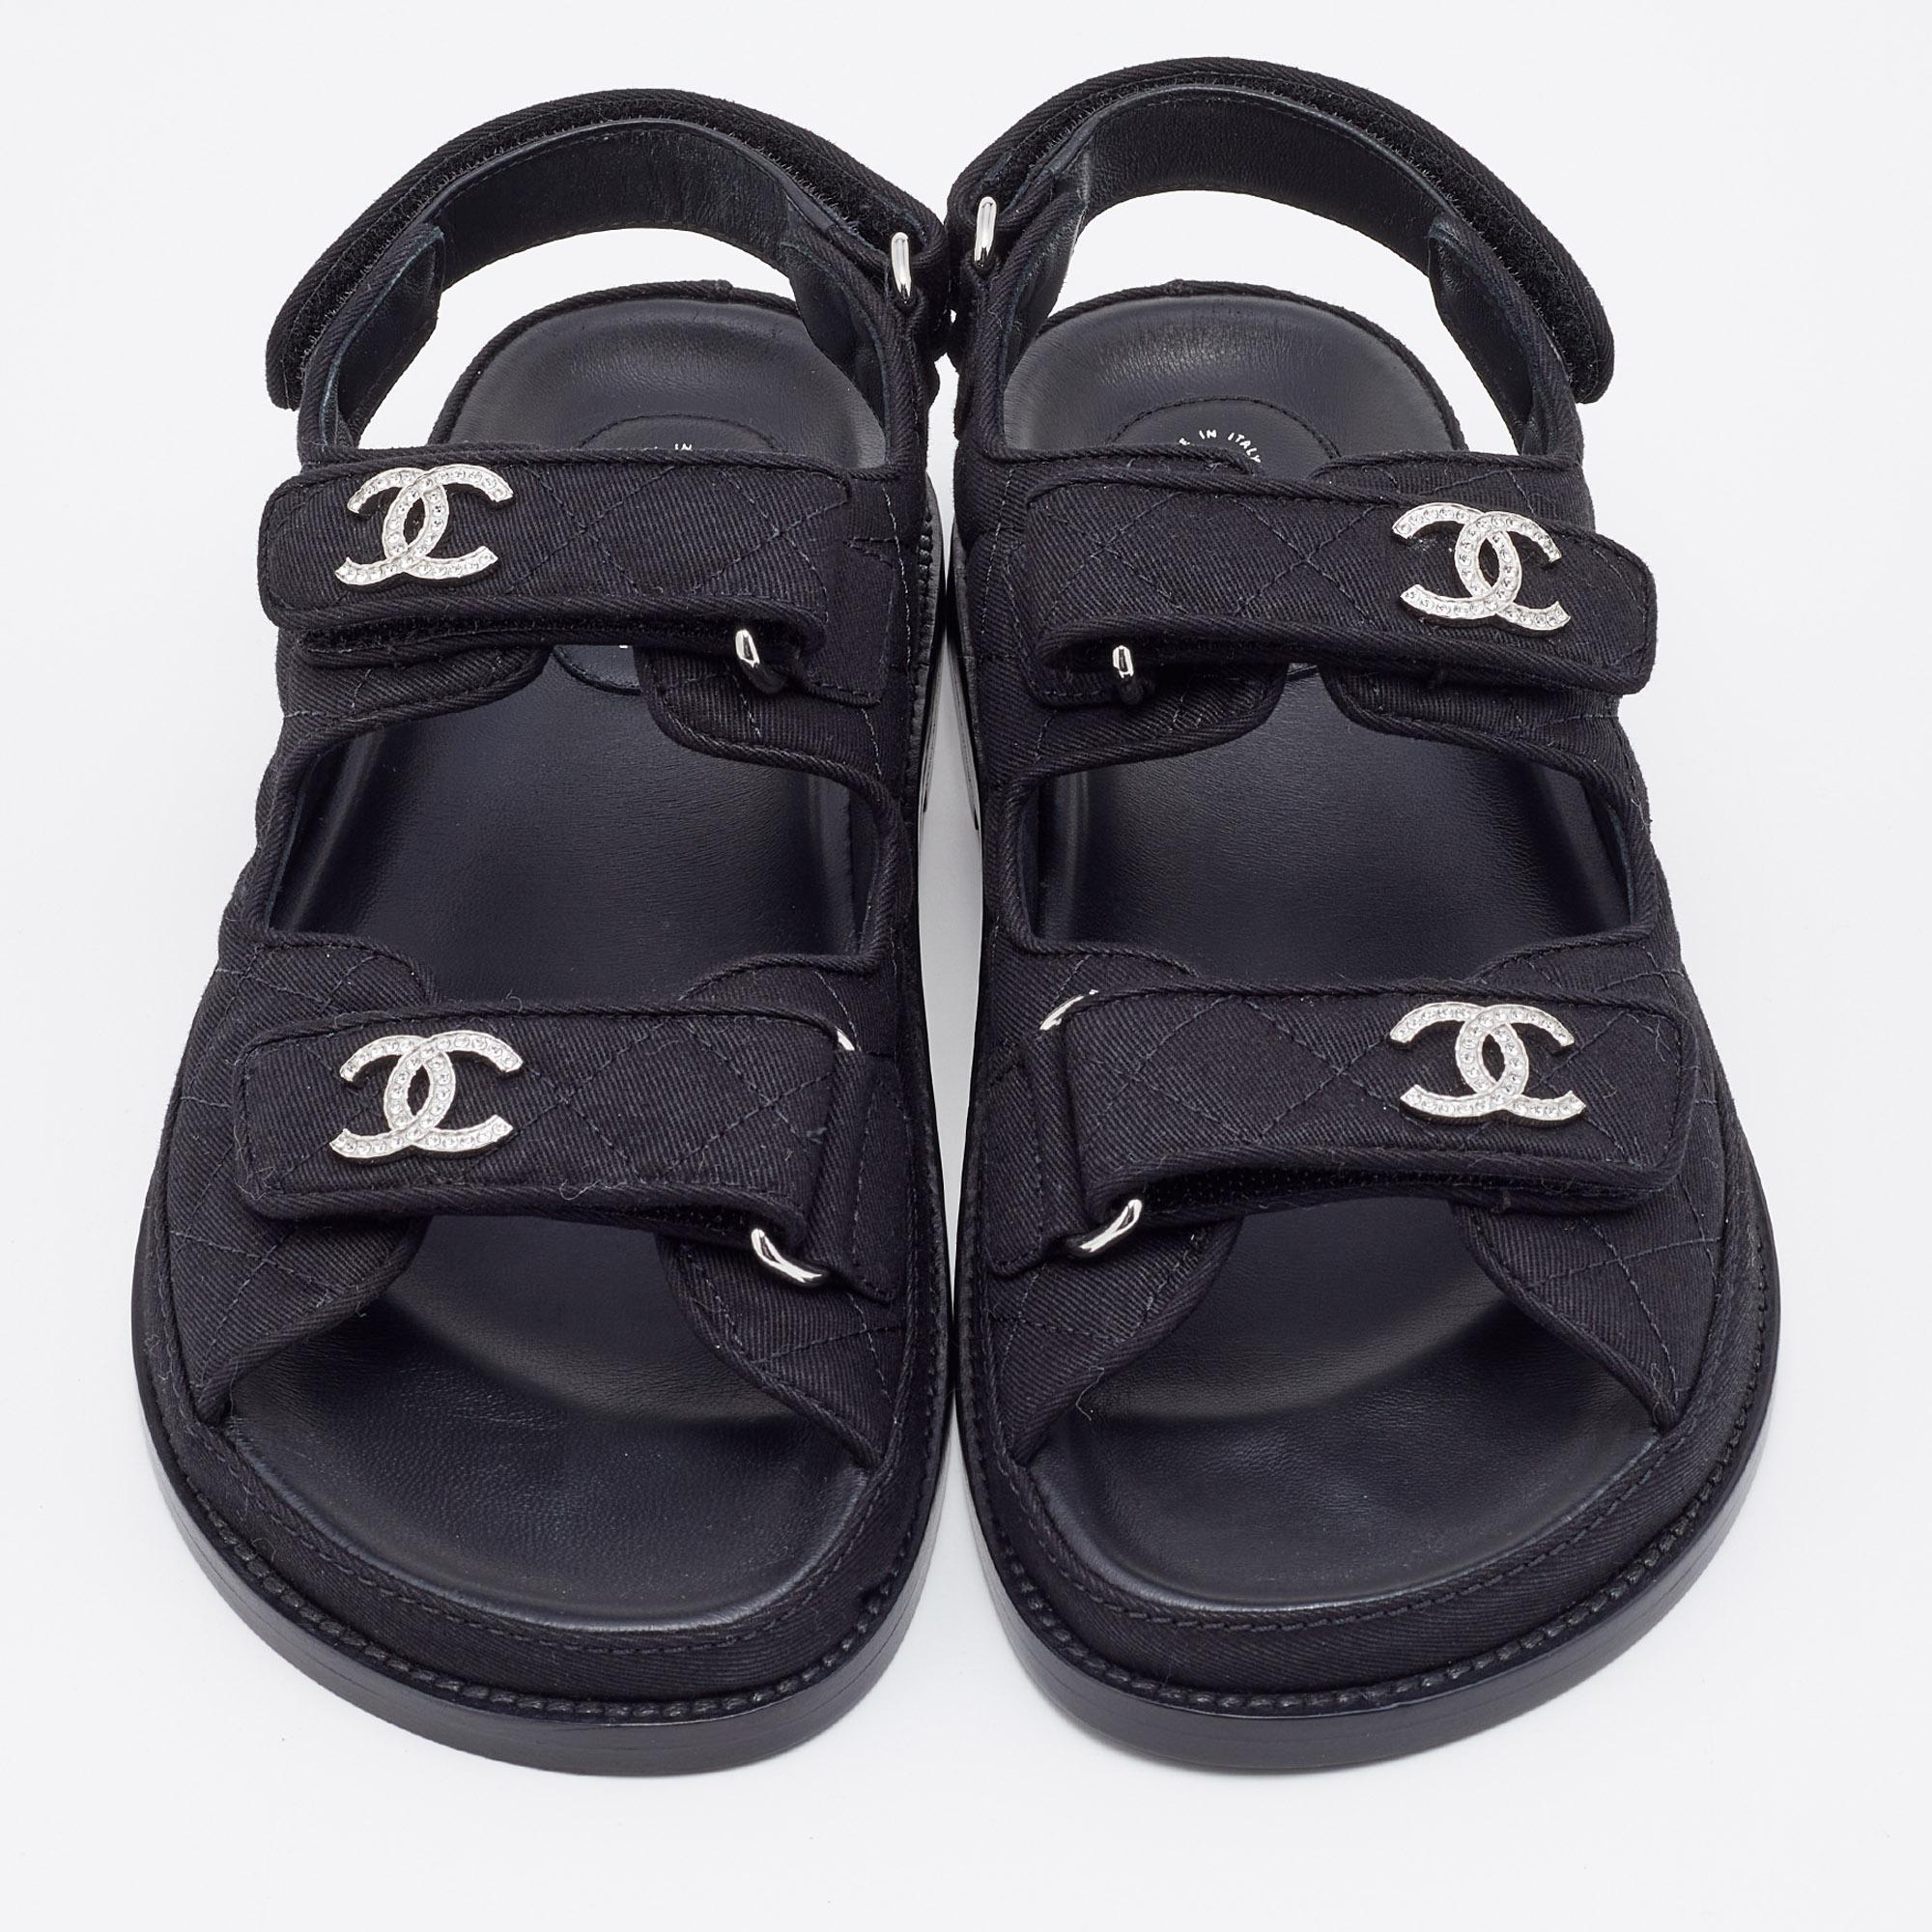 Be warm-weather-ready in the chicest way possible with these stylish Chanel Dad sandals. Fashioned in black quilted fabric with tonal stitching and a CC logo on each Velcro strap, these comfortable sandals also have slingback straps and platforms